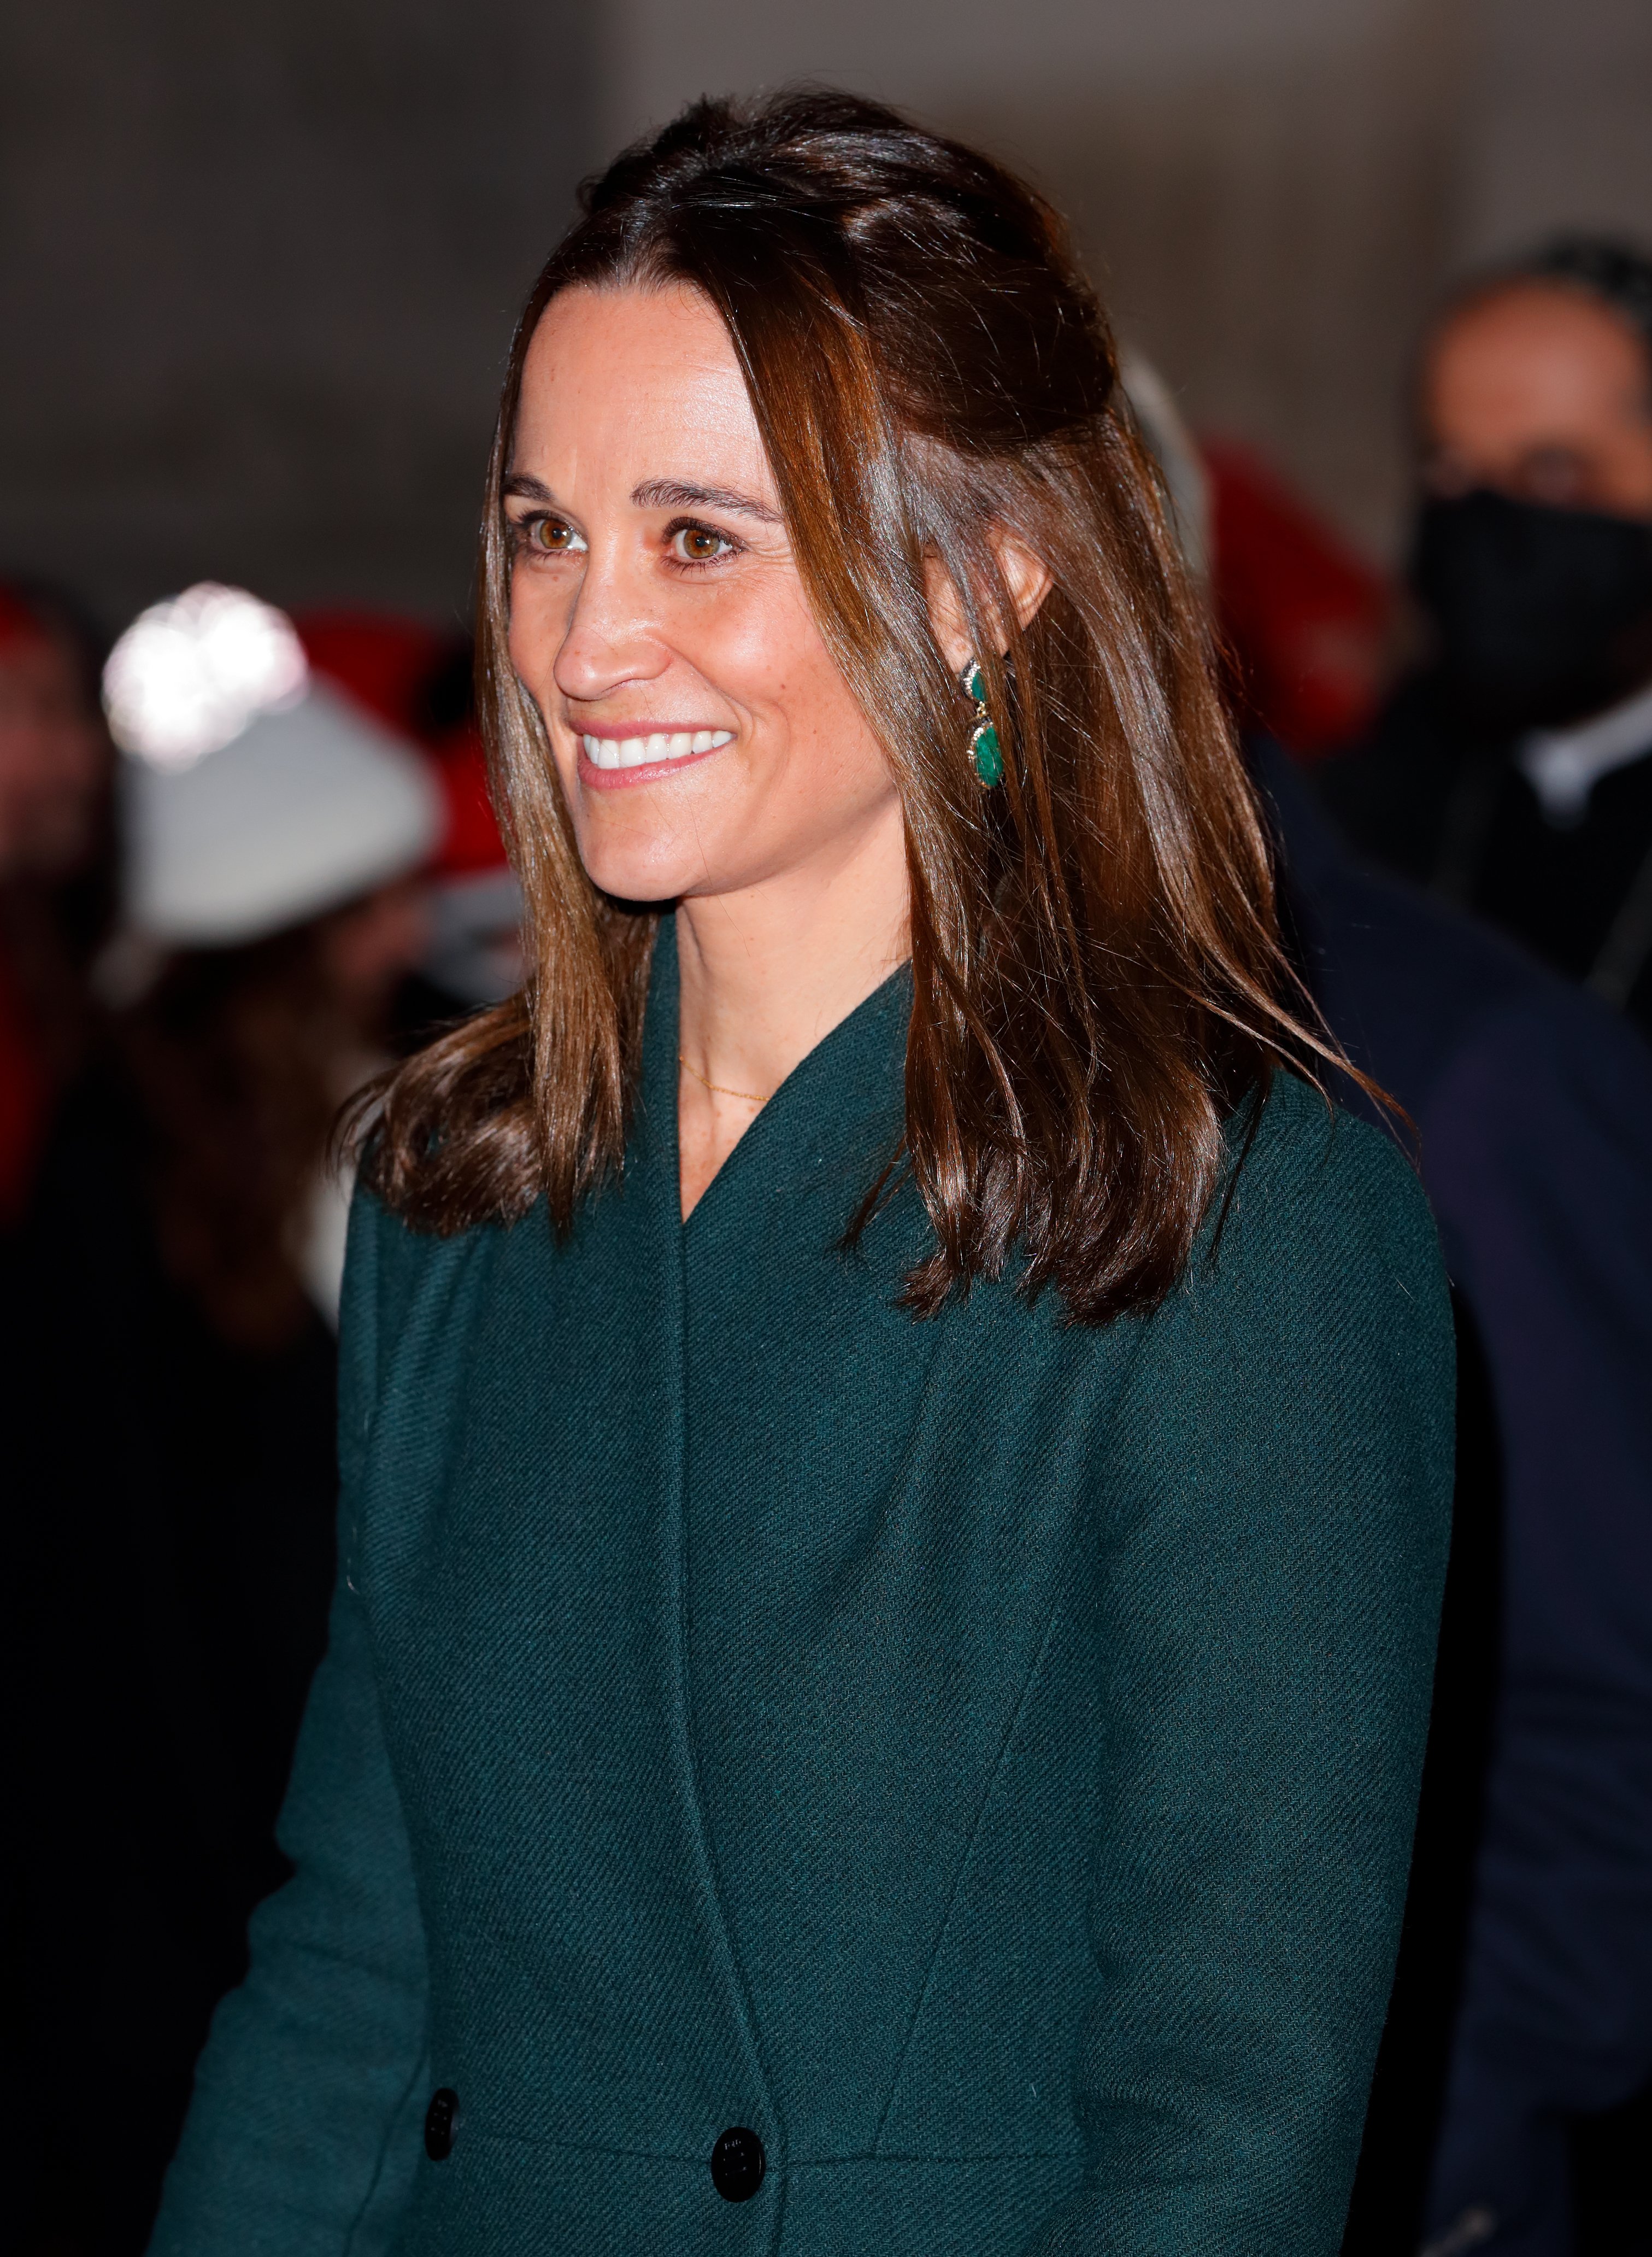 Pippa Middleton attends the 'Together at Christmas' community carol service at Westminster Abbey on December 8, 2021 in London, England. | Source: Getty Images